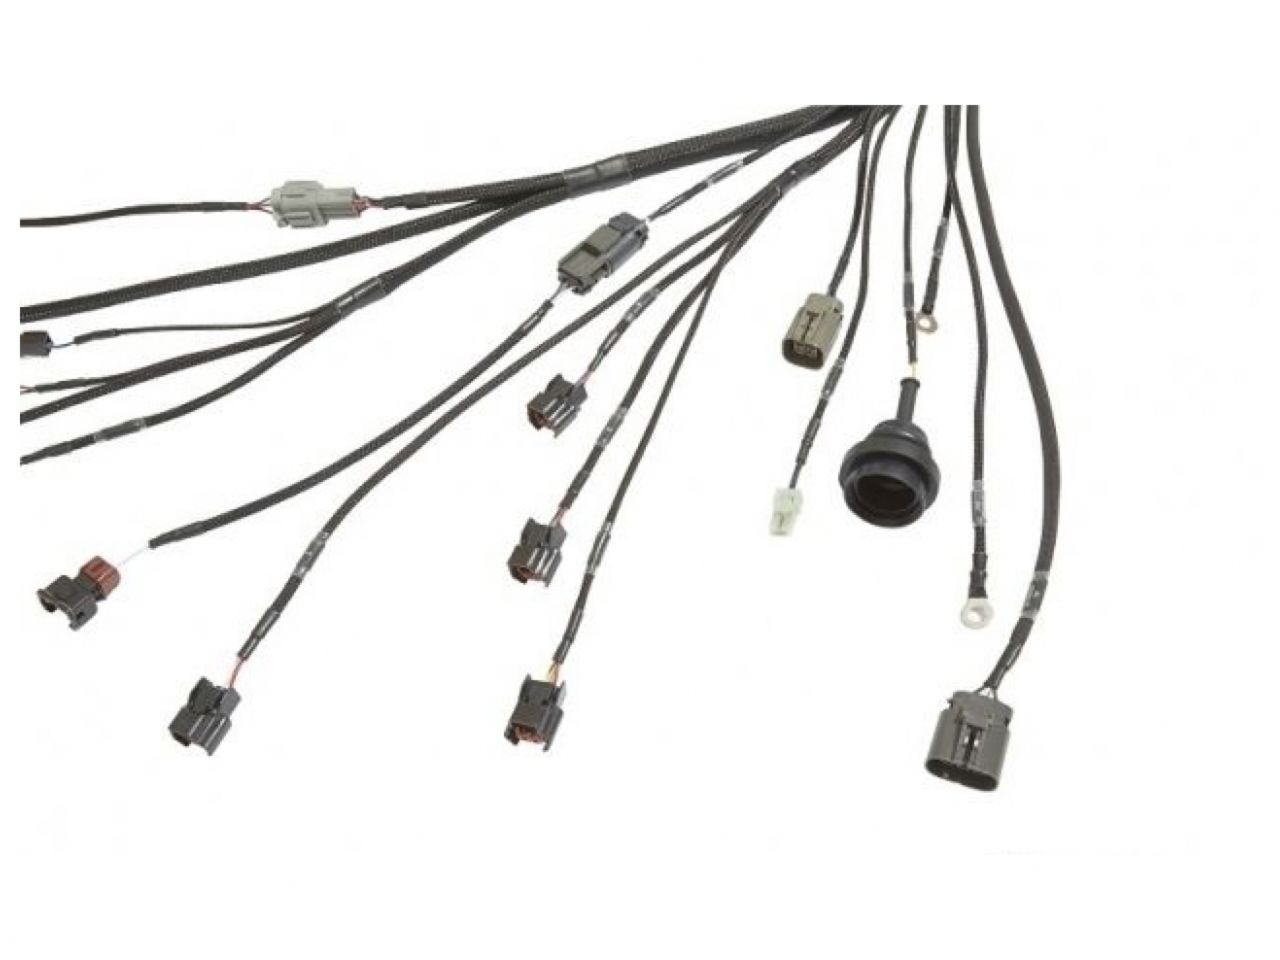 Wiring Specialties Universal / Standalone Wiring Harness for S13 SR20DET - PRO SERIES